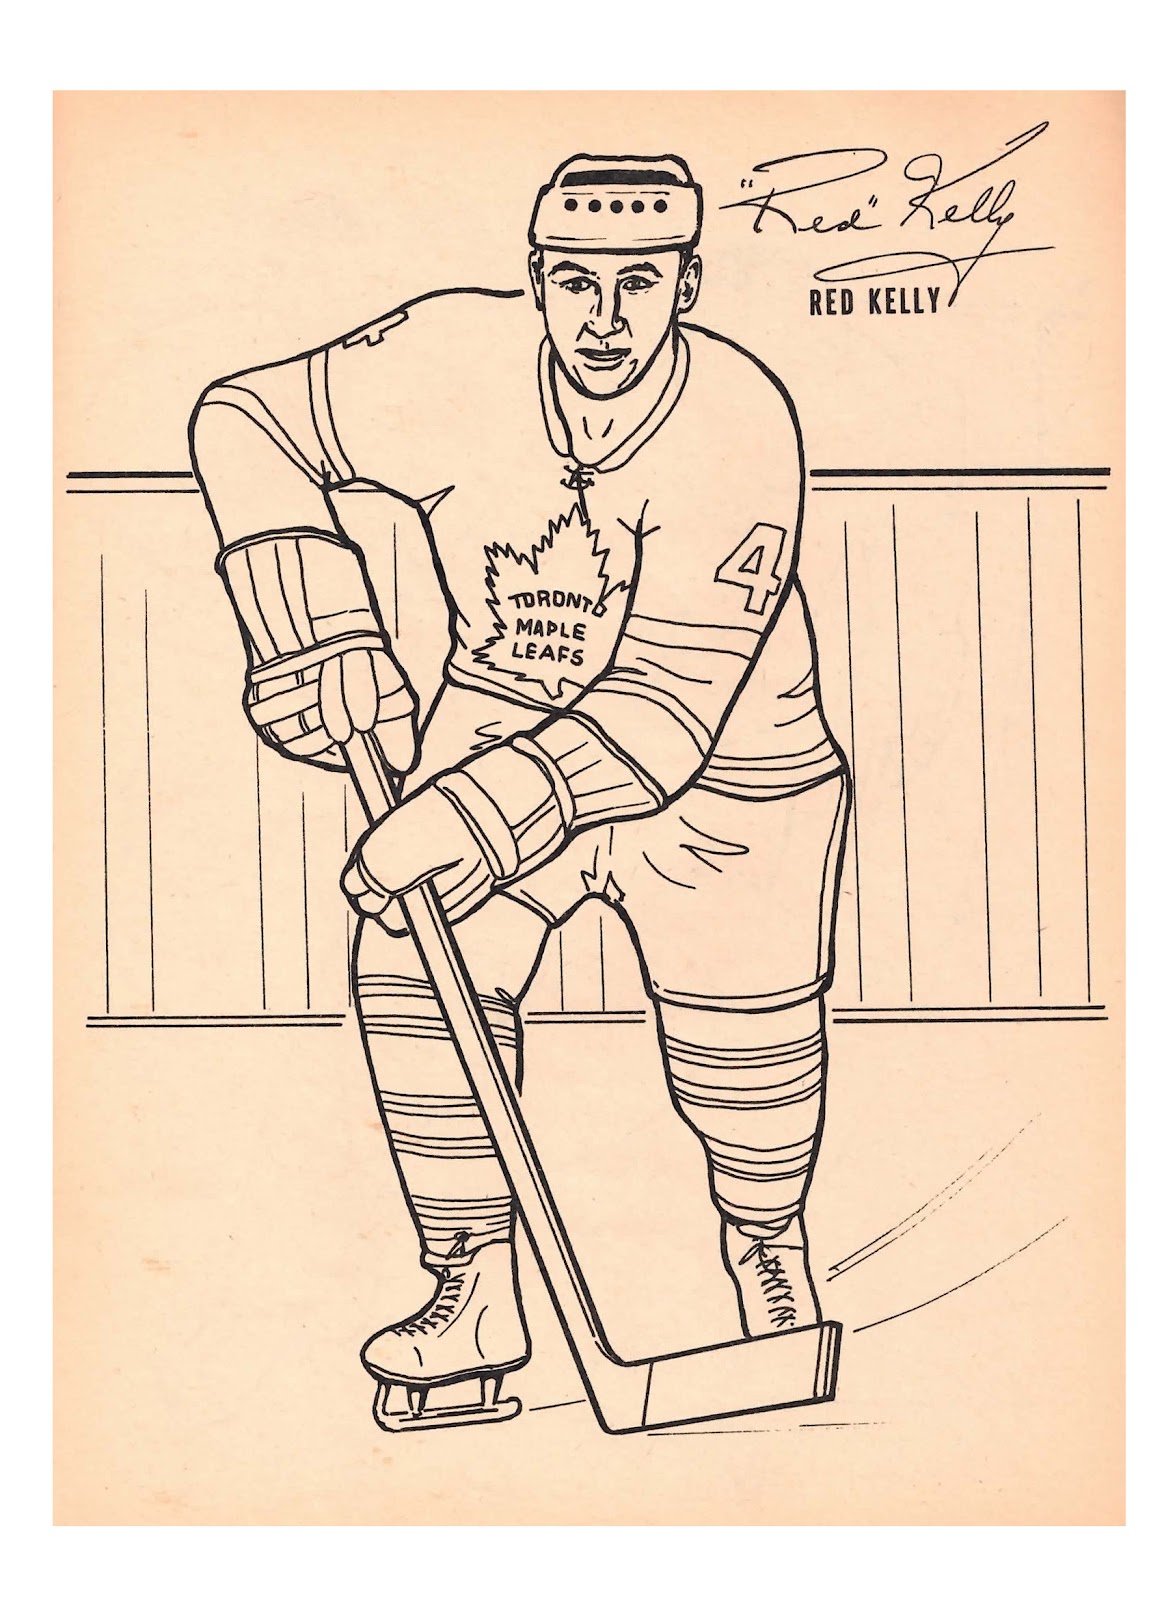 Toronto Maple Leafs Coloring Pages